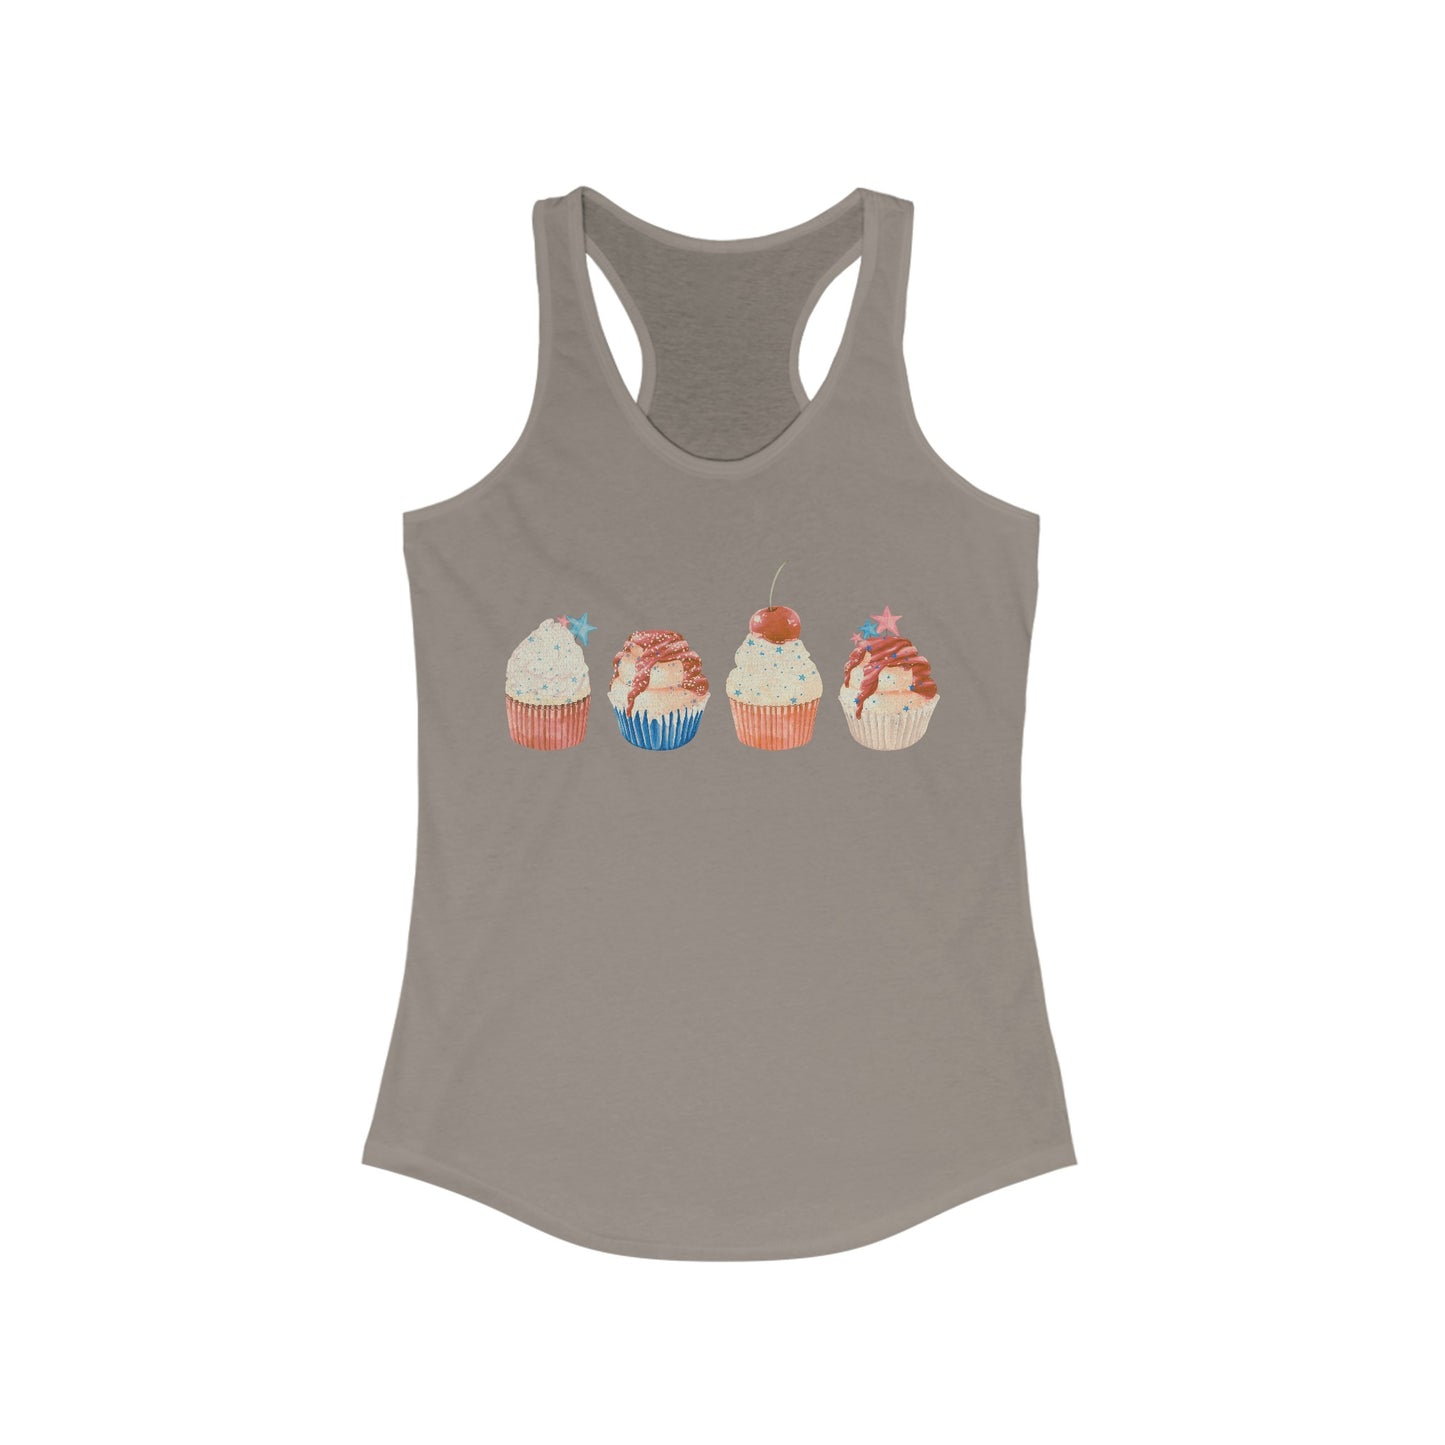 Fourth of July Cupcakes - Women's Ideal Racerback Tank